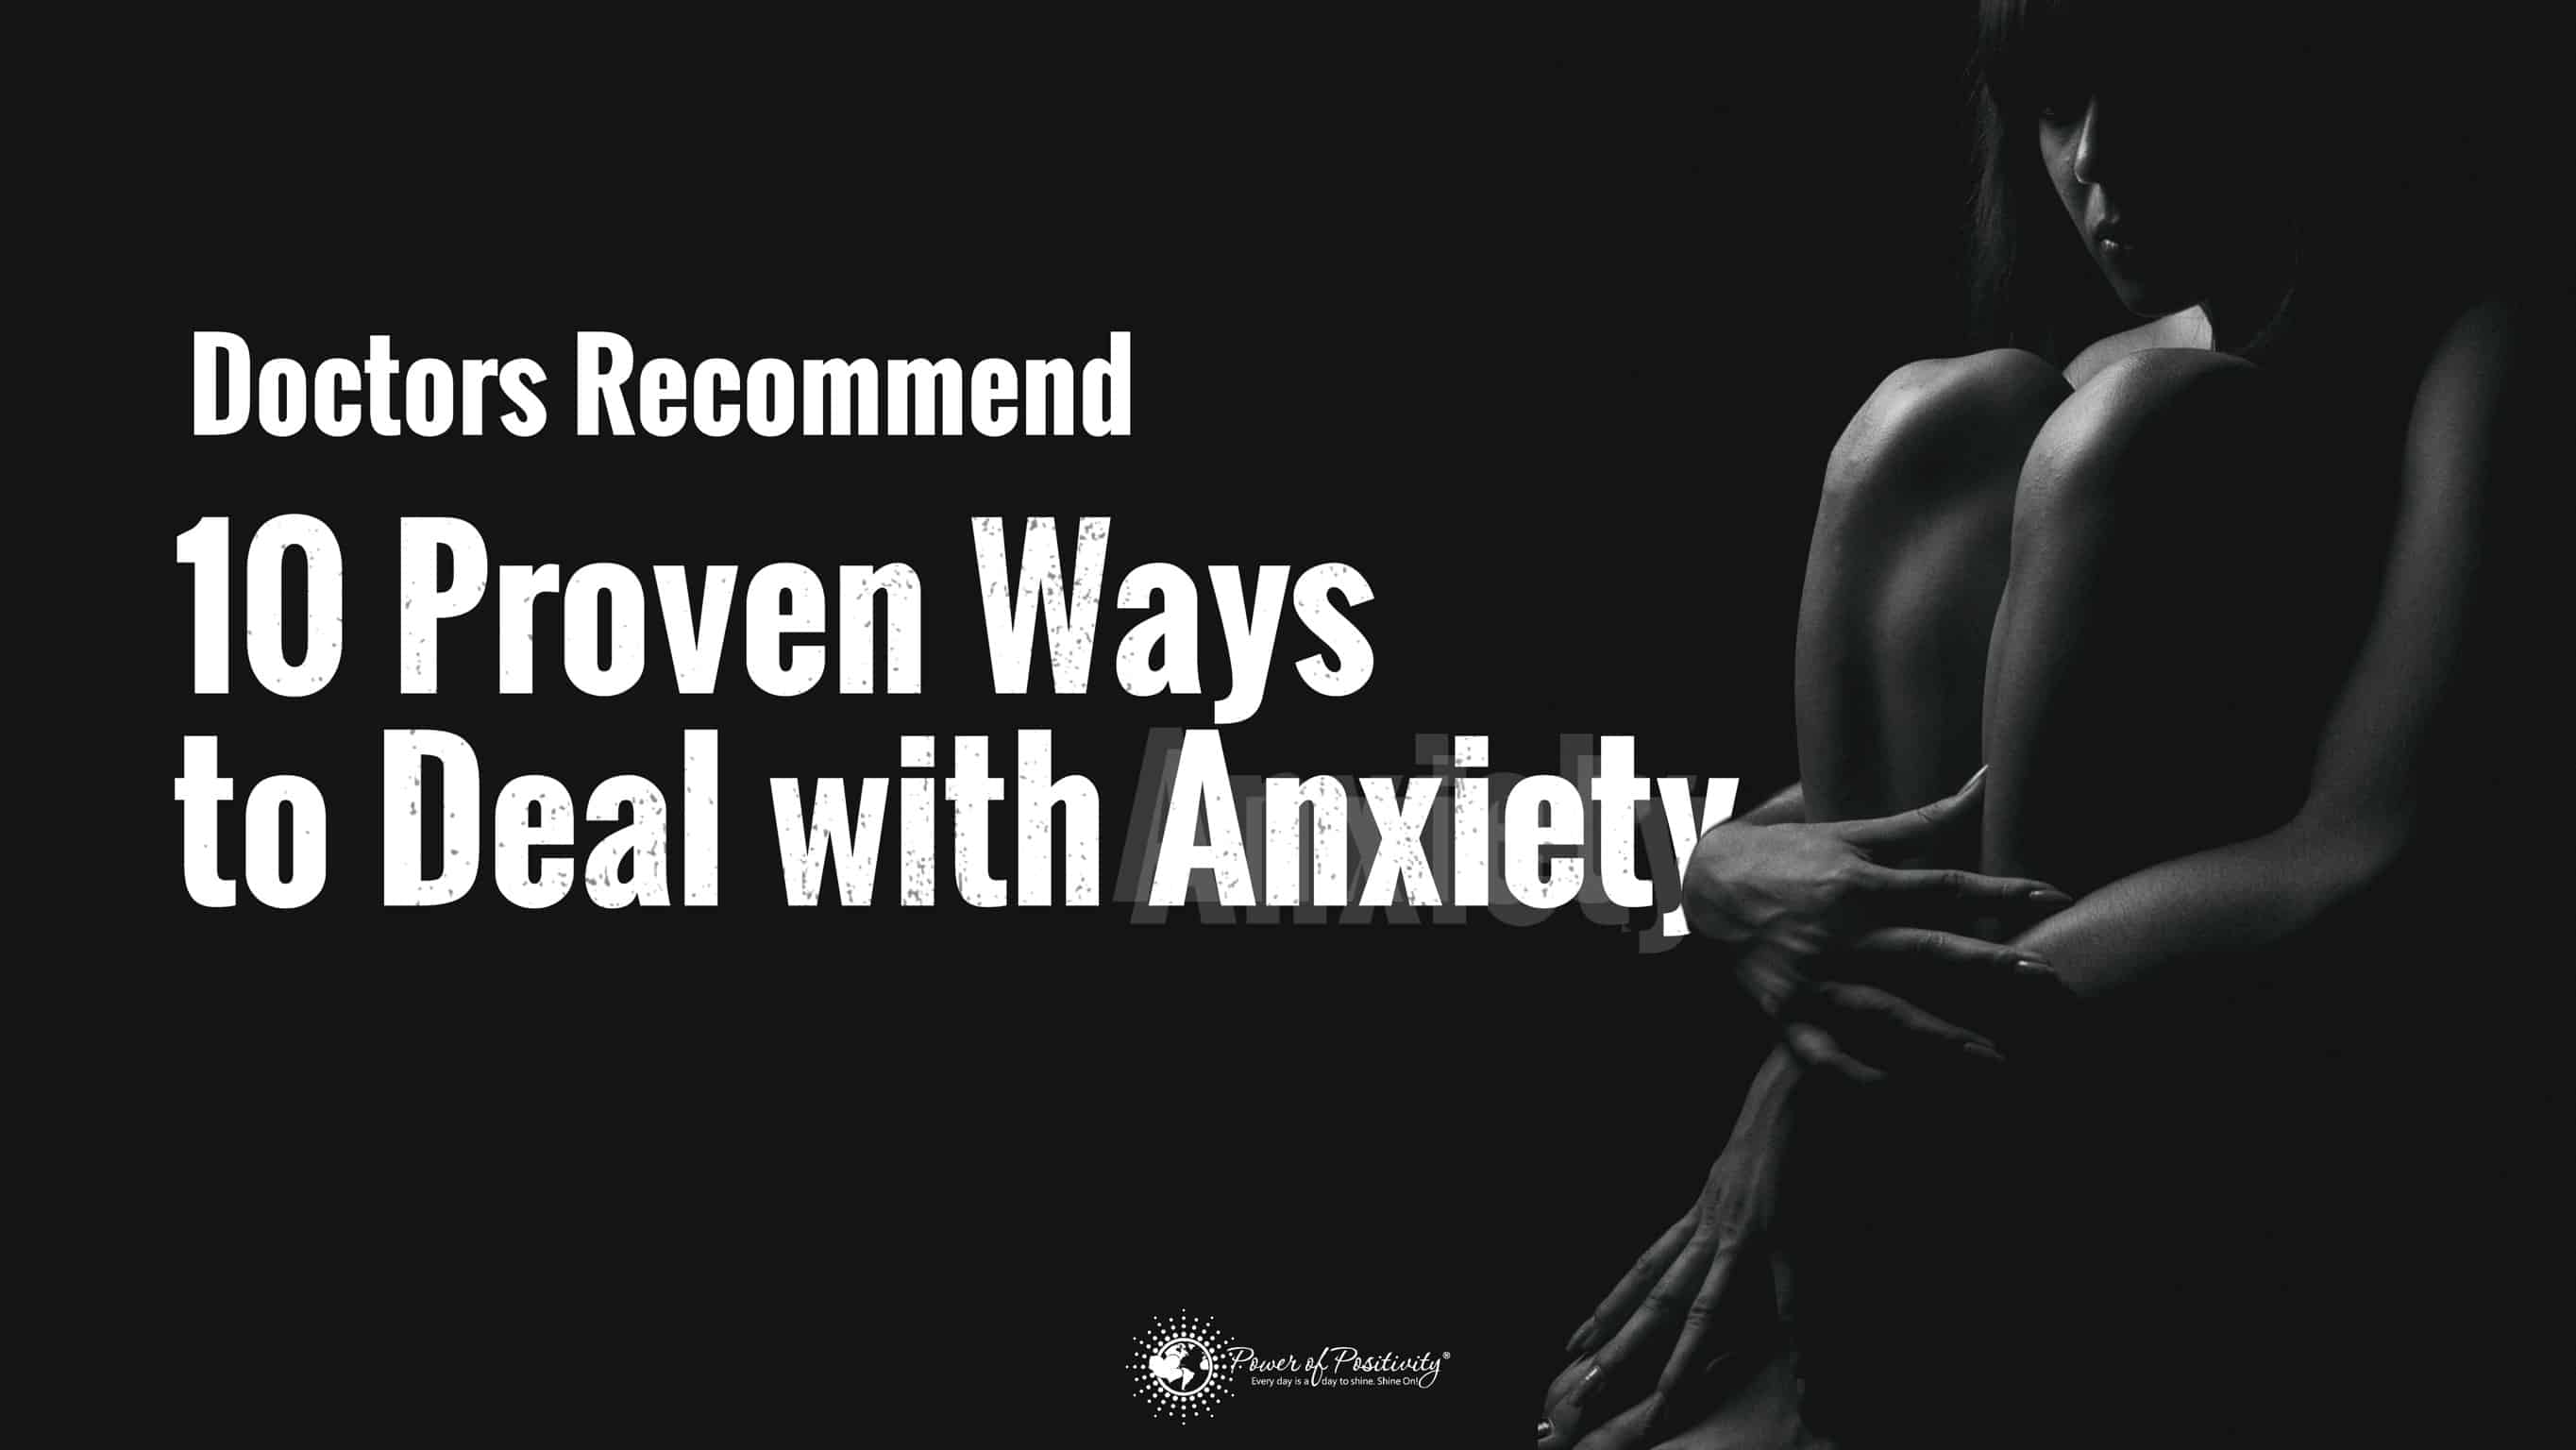 Doctors Recommend 10 Proven Ways to Deal With Anxiety